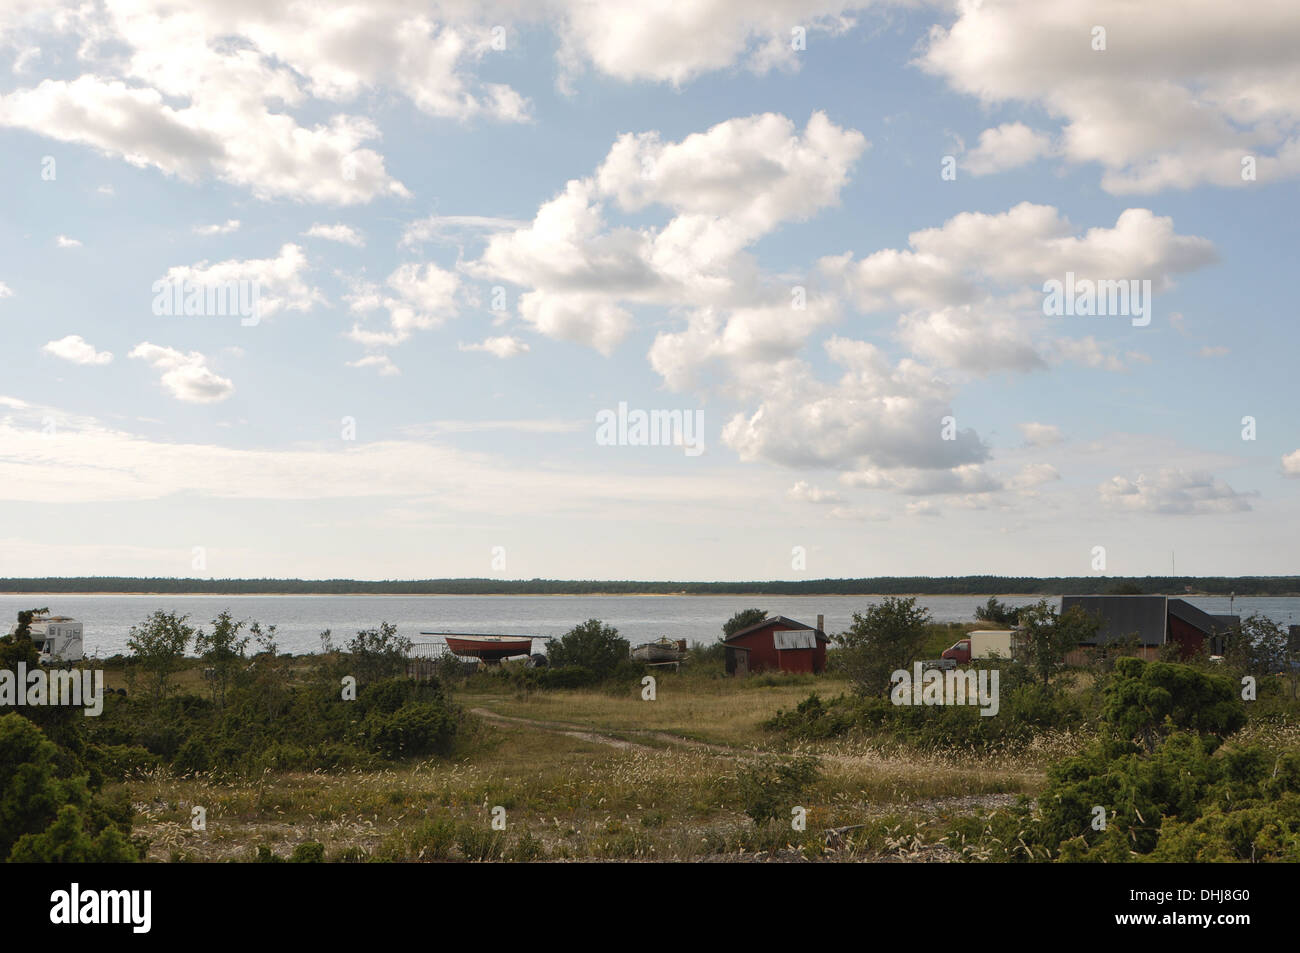 This is a place called Sysneudd located  at Gotland Sweden . This is a paradise on earth. Stock Photo